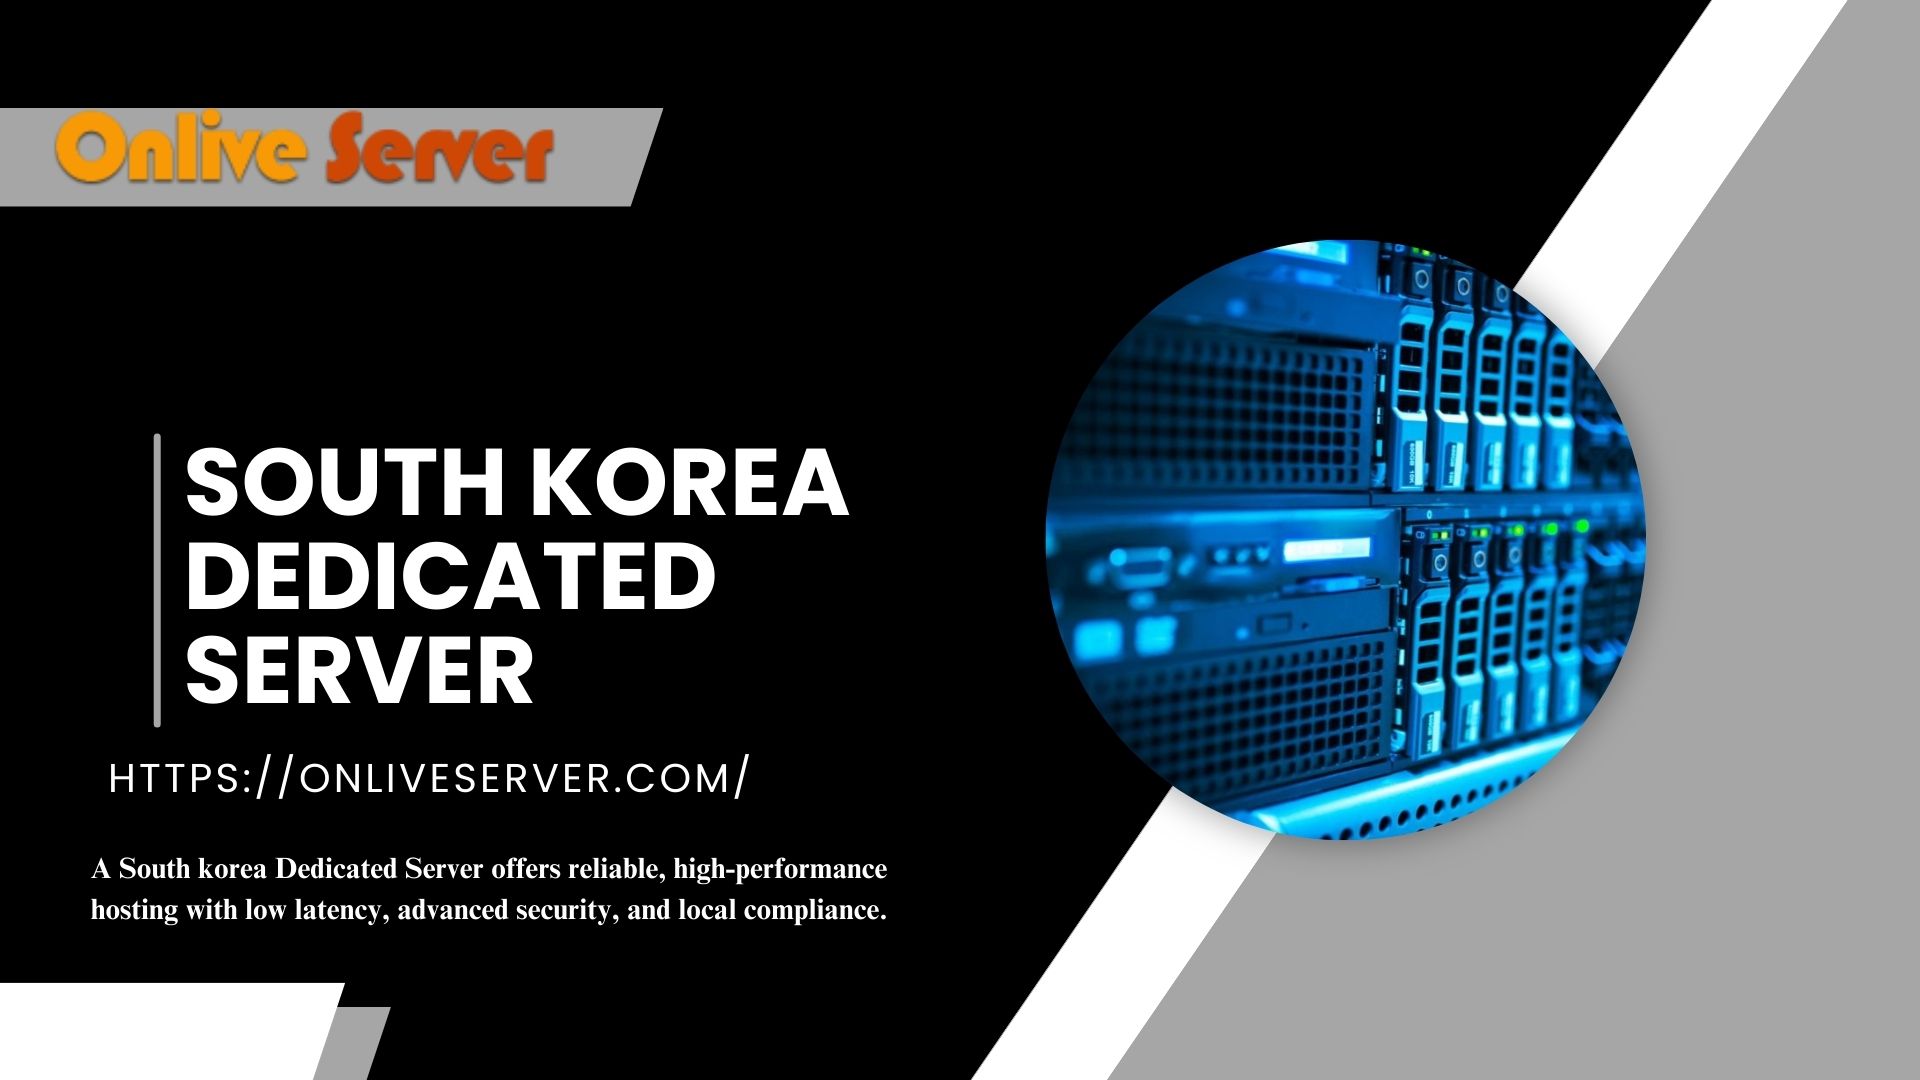 South Korea Dedicated Server the Best Choice for Your Web Business